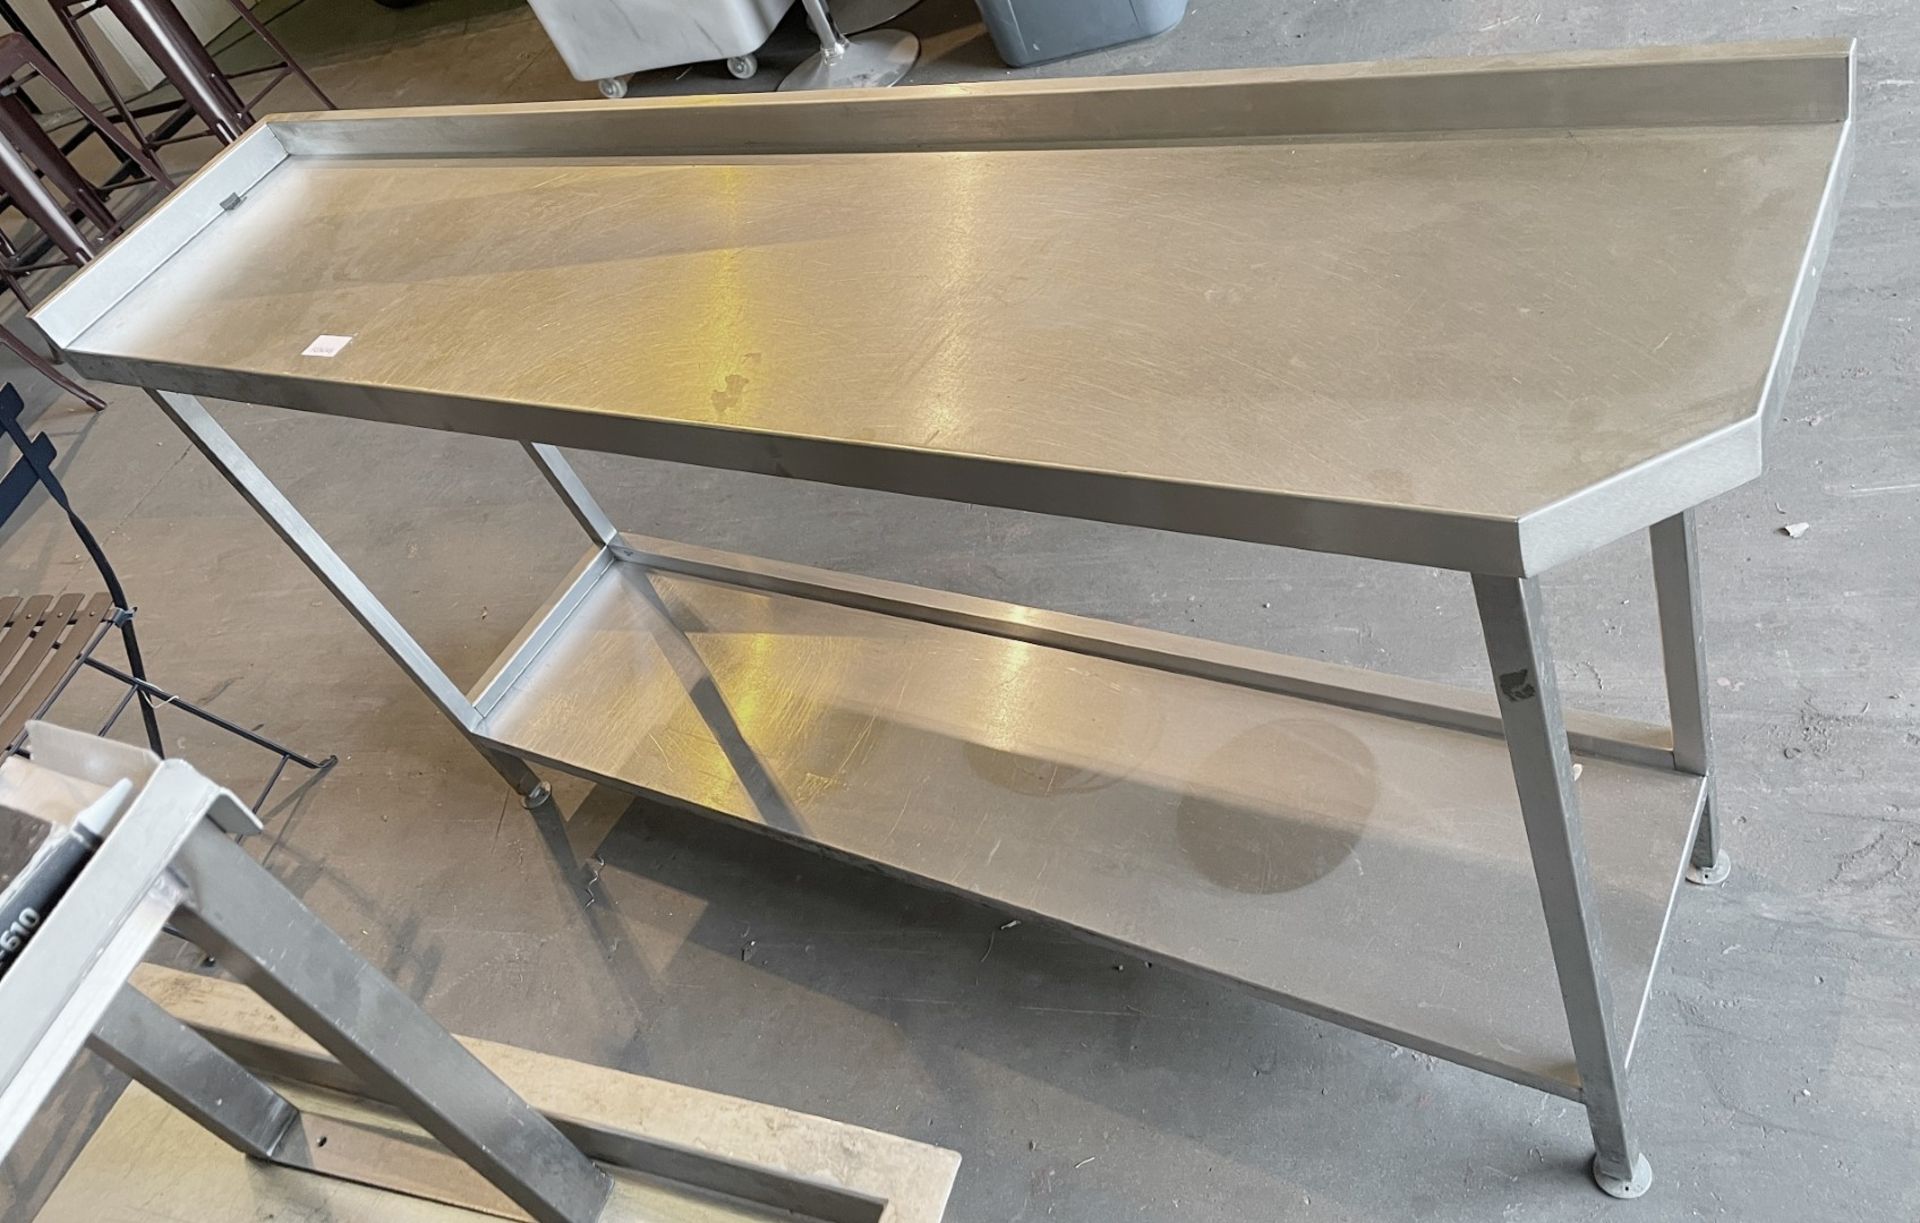 1 x Narrow Stainless Steel Prep Table - Approx 180X40X90Cm - Ref: FGN046 - CL834 - Location: Essex, - Image 3 of 4